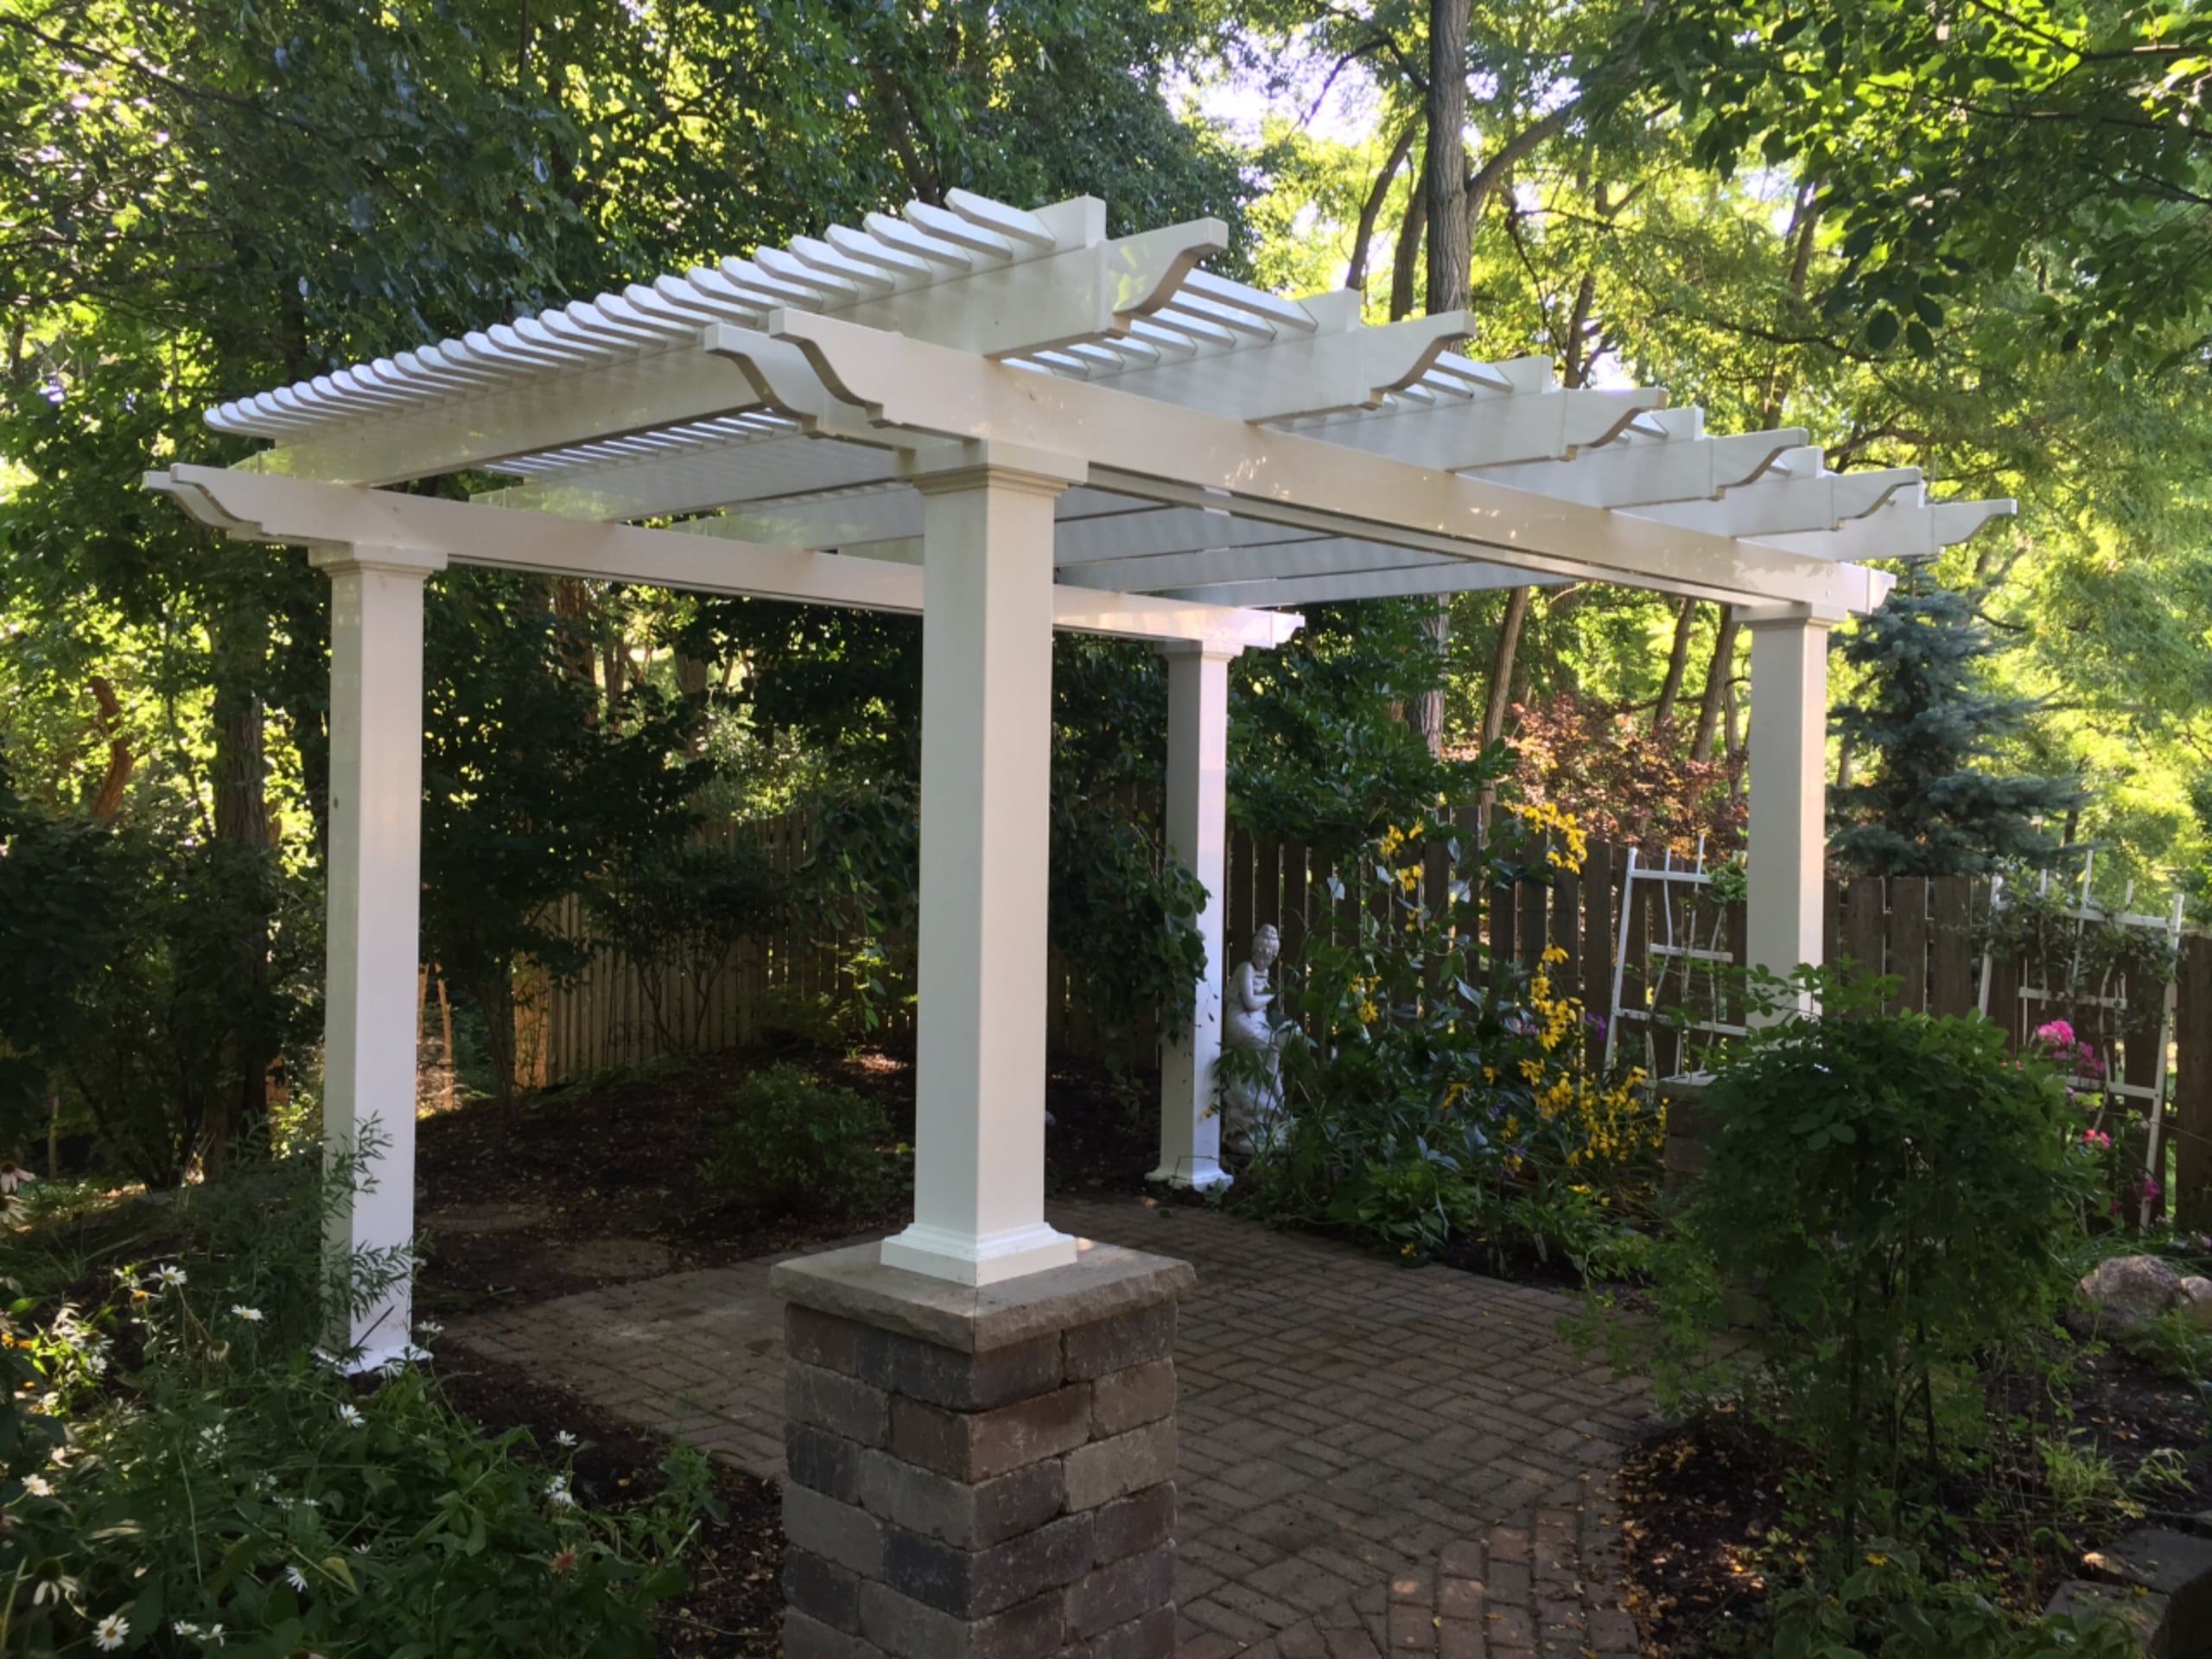 This white pergola is covering an open area with brick flooring. There are plants and trees all around the pergola.